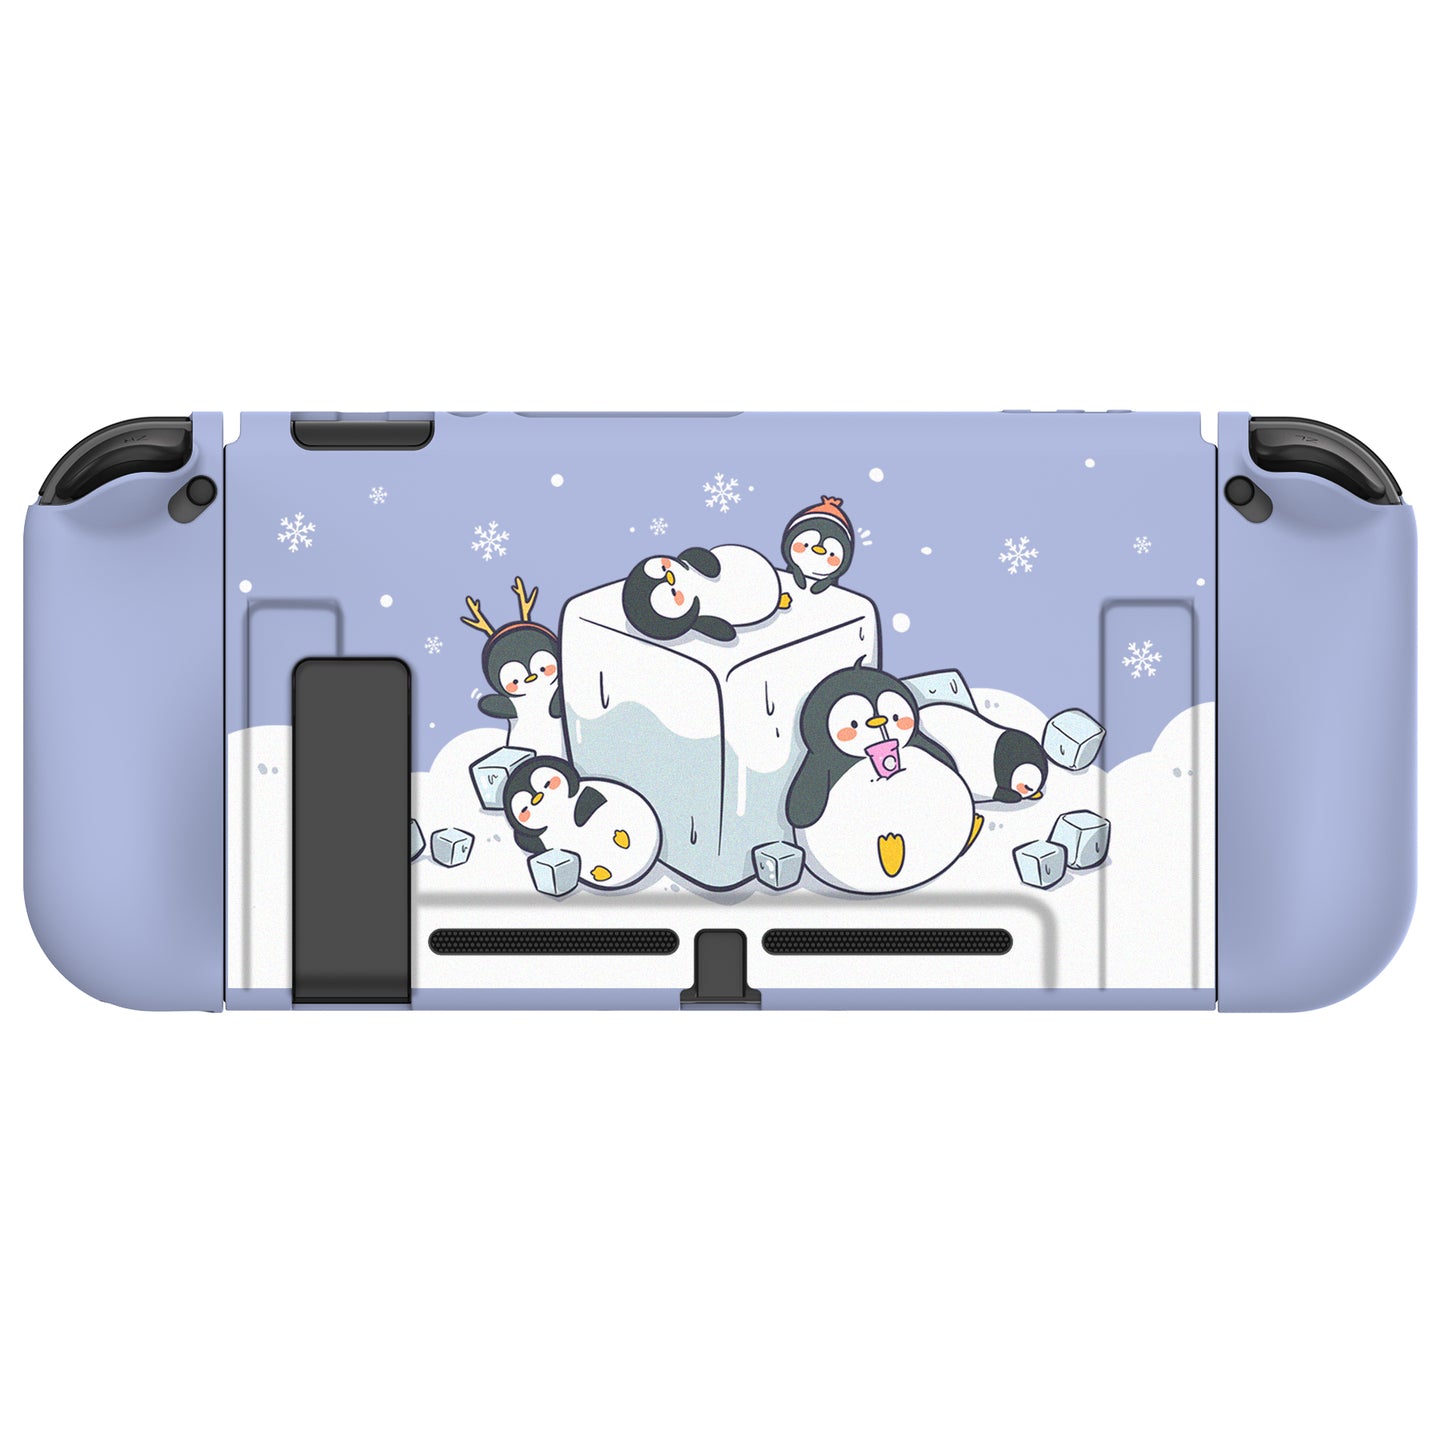 PlayVital ICY Cube Penguin Protective Case for NS, Soft TPU Slim Case Cover for NS Console with Colorful ABXY Direction Button Caps - NTU6023G2 PlayVital